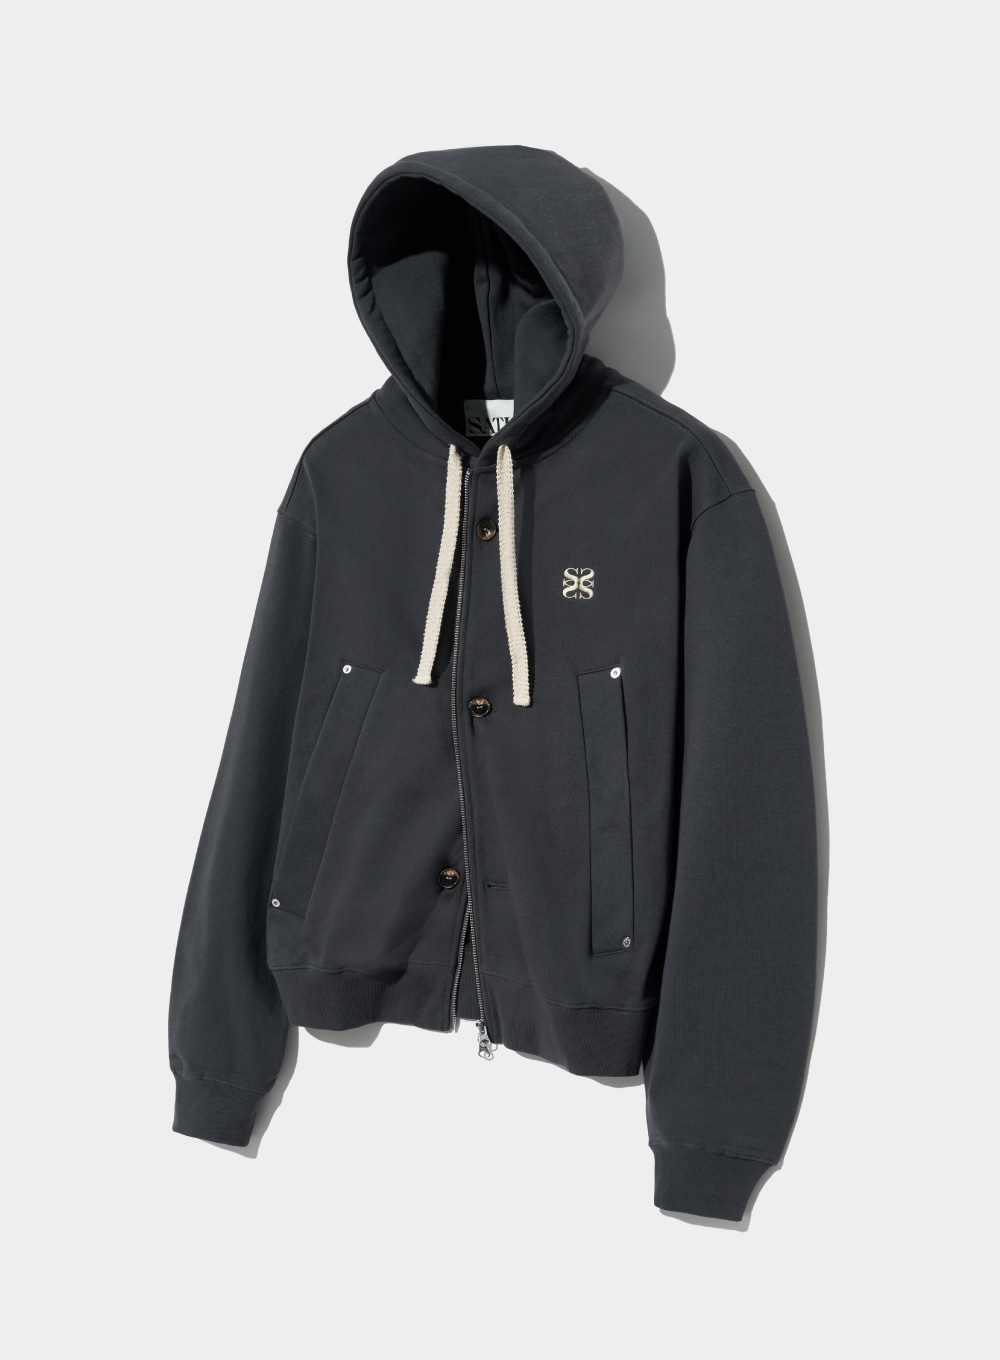 Teo Cotton All Day Hood Zip-Up - Classic Charcoal